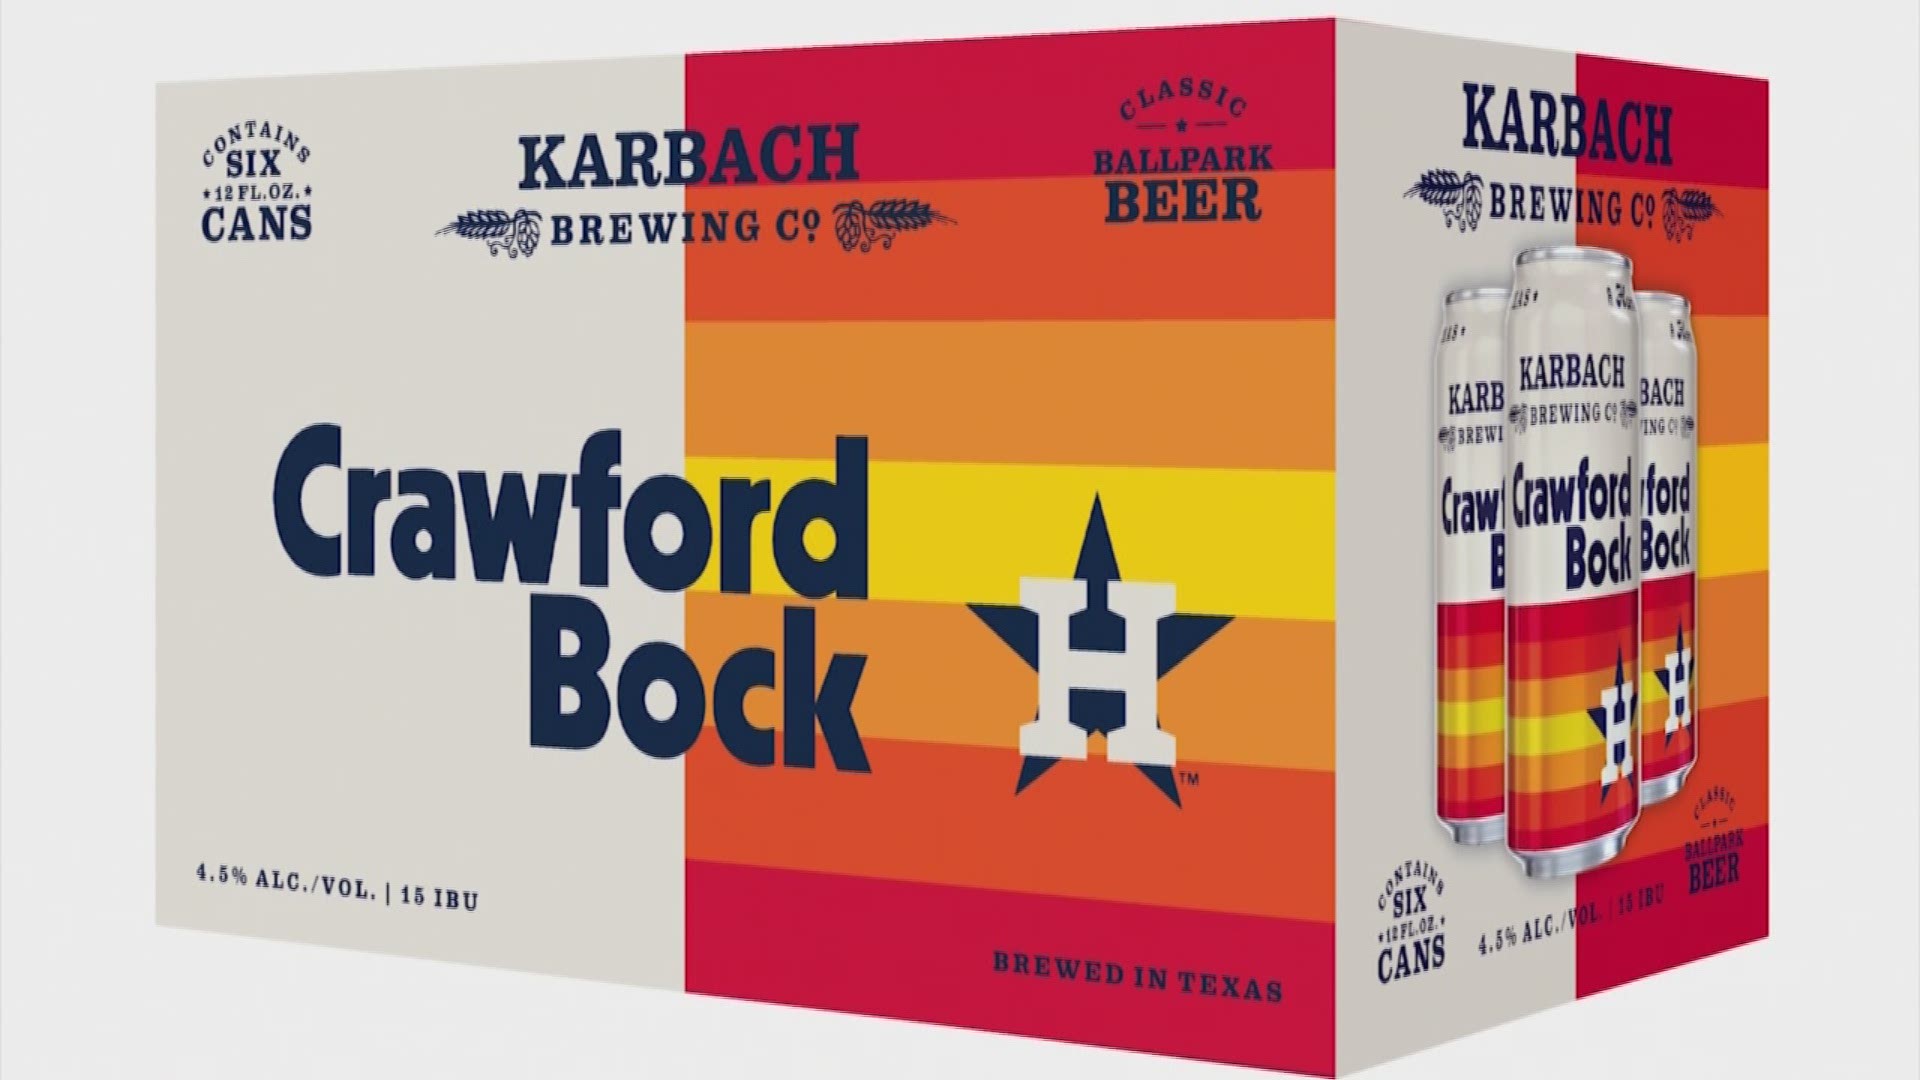 Baseball and beer are a natural match, so it’s no surprise the Houston Astros have teamed up with Karbach Brewing Co. to bring fans a new beer, and give back to the community at the same time.